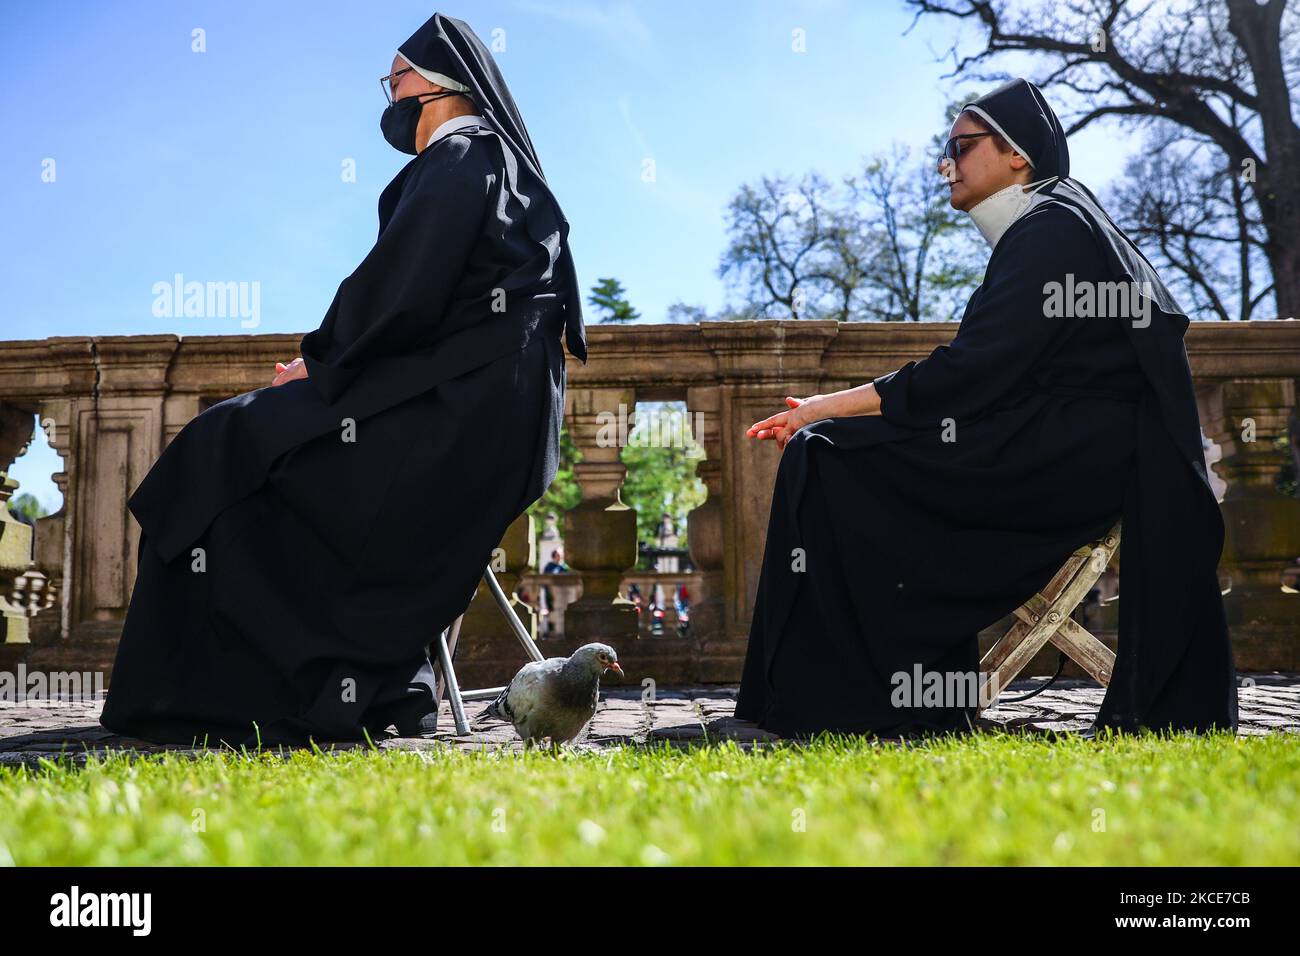 Nuns attend the ceremony commemorating St. Stanislaus at Church on the Rock in Krakow, Poland on May 9, 2021. Each year on the first Sunday following May 8, a procession honoring Stanislaus of Szczepanow, a Polish bishop and martyr (1030-1079), walks through the streets of Krakow carring relics of saints and blessed. This year, due to the coronavirus pandemic, the procession was cancelled but faithful may attend the Holy Mass celebrated outdoors with the participation of the Polish Episcopate. (Photo by Beata Zawrzel/NurPhoto) Stock Photo